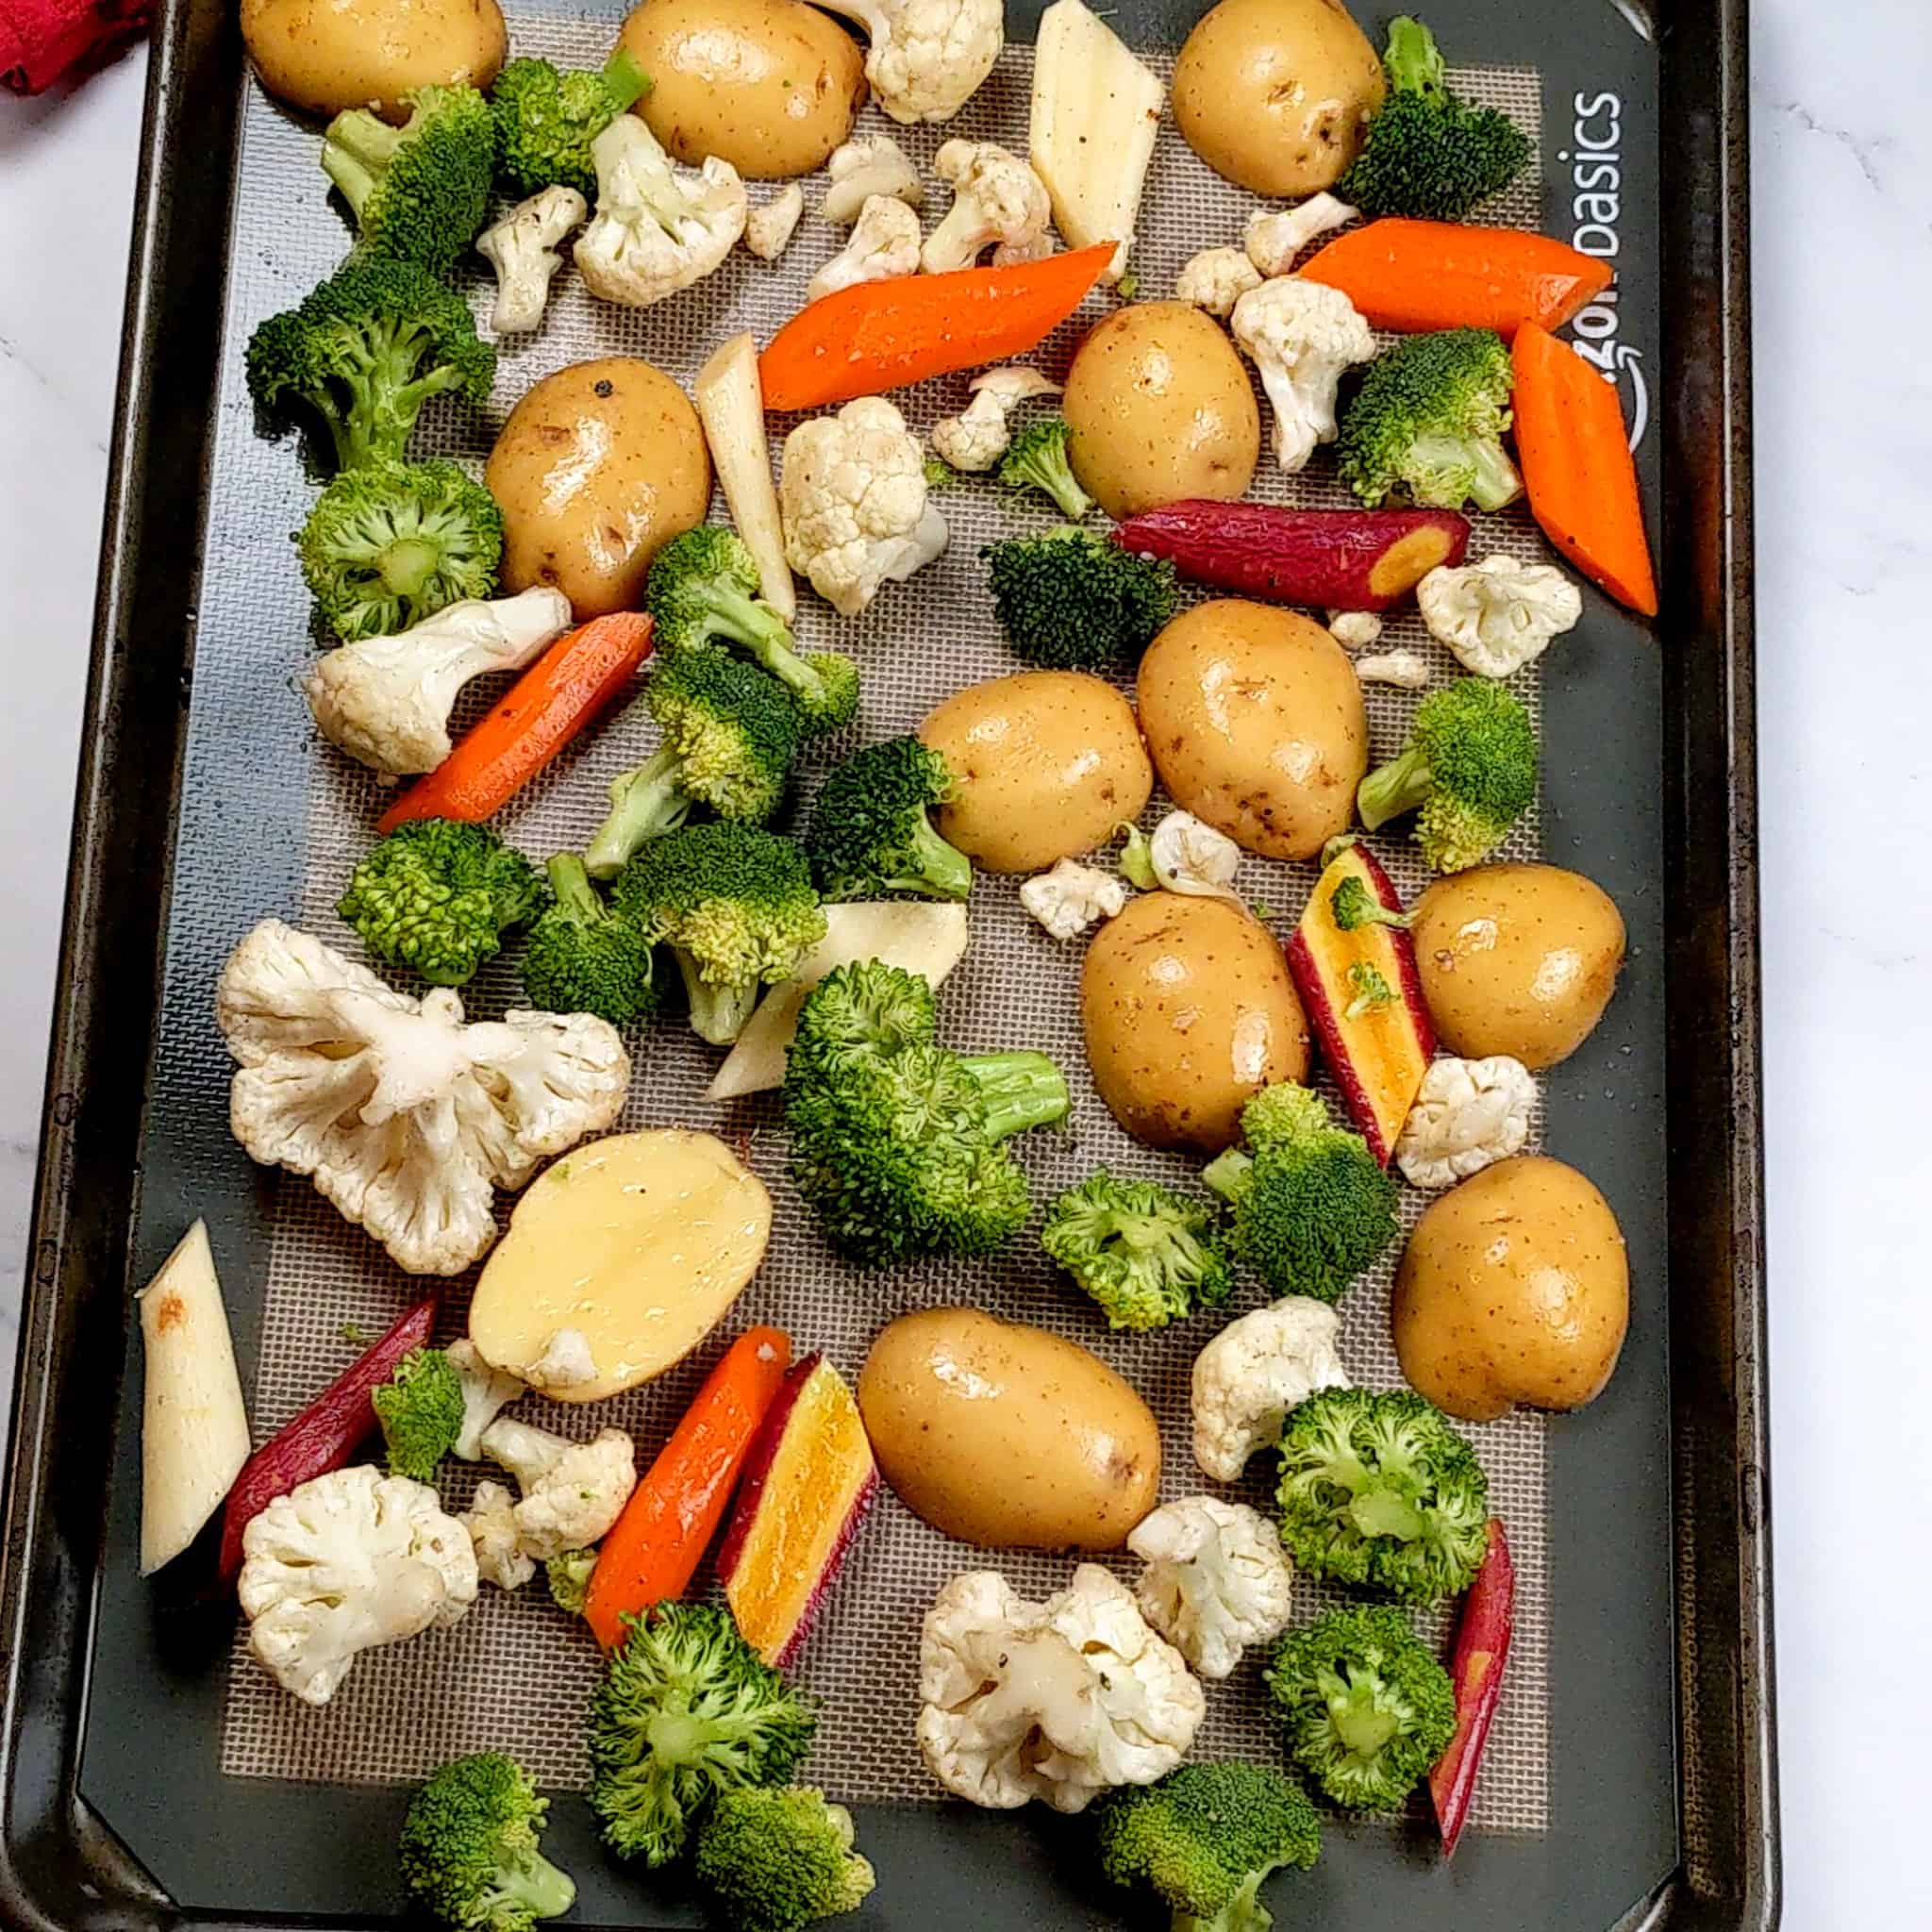 salt and pepper seasoned mixed vegetables of baby Dutch potatoes, tri-color carrots, broccoli and cauliflower florets on a non-stick baking liner layered sheet pan.